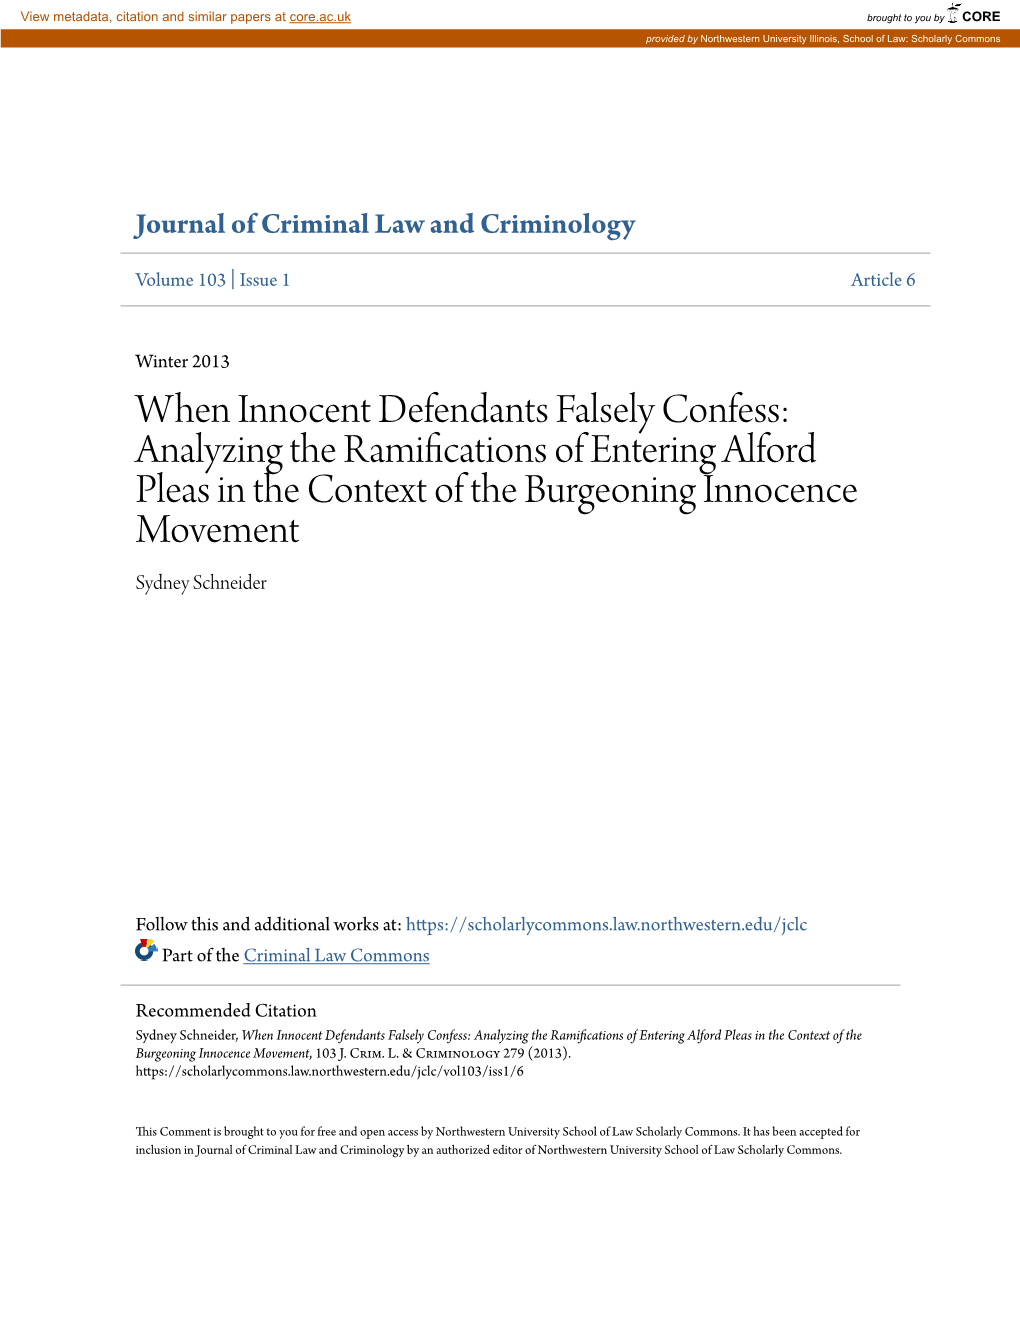 When Innocent Defendants Falsely Confess: Analyzing the Ramifications of Entering Alford Pleas in the Context of the Burgeoning Innocence Movement Sydney Schneider